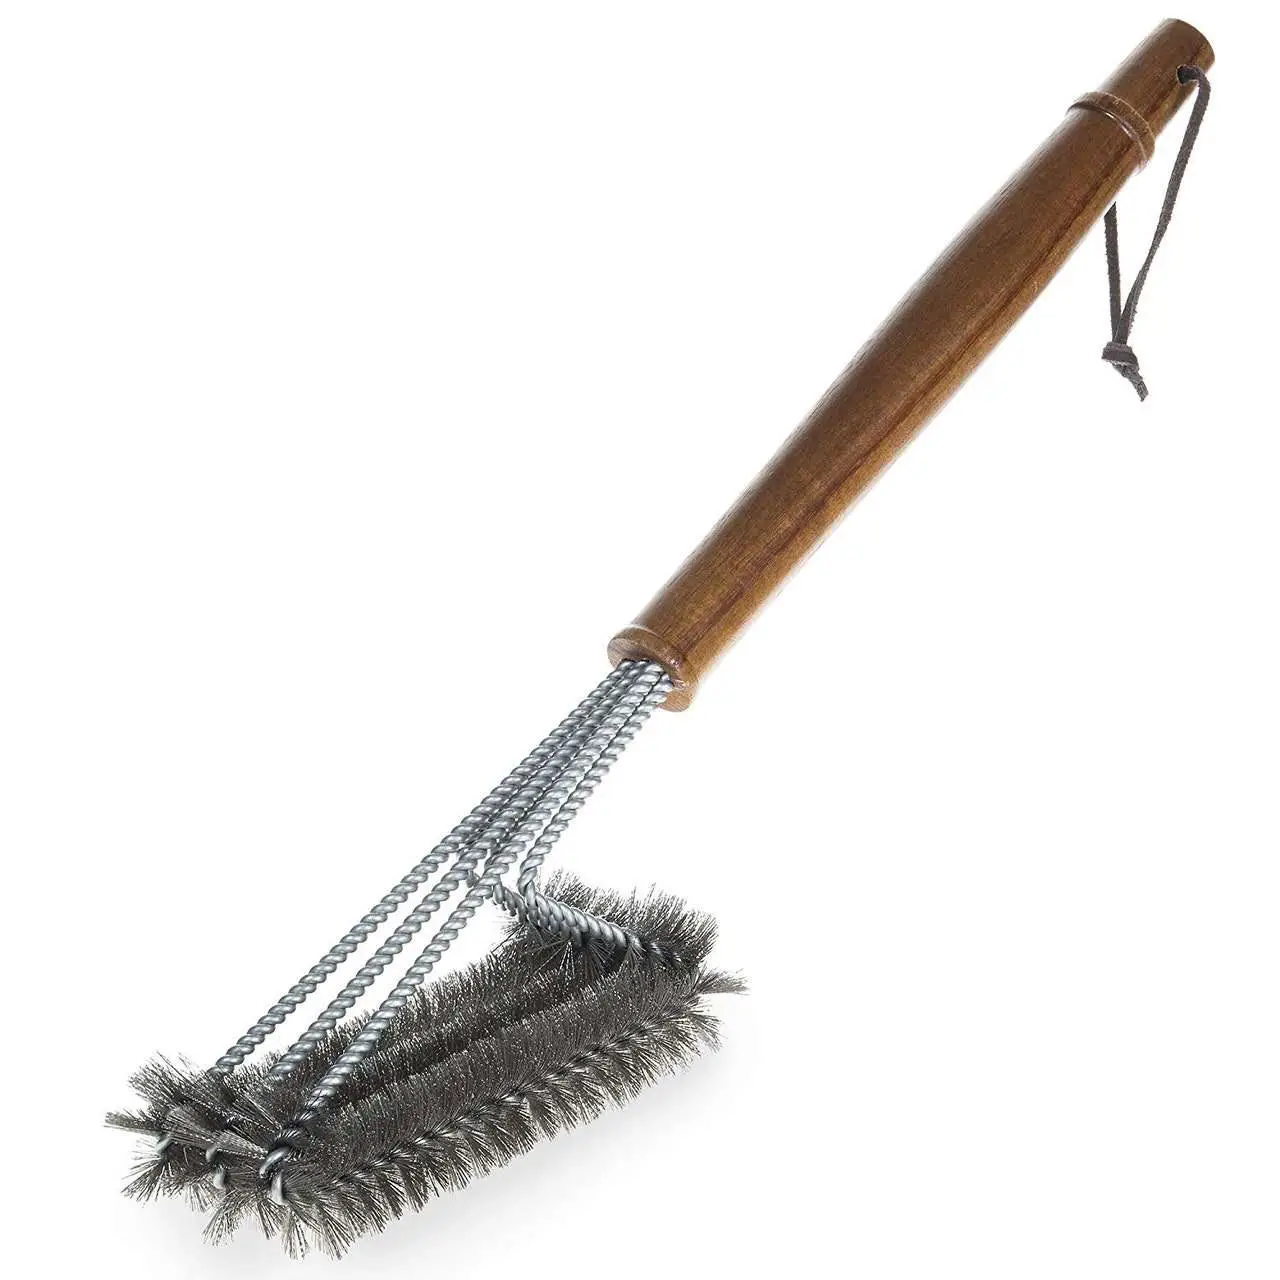 What Is the Best Grill Cleaning Brush? Our 2019 Product ...